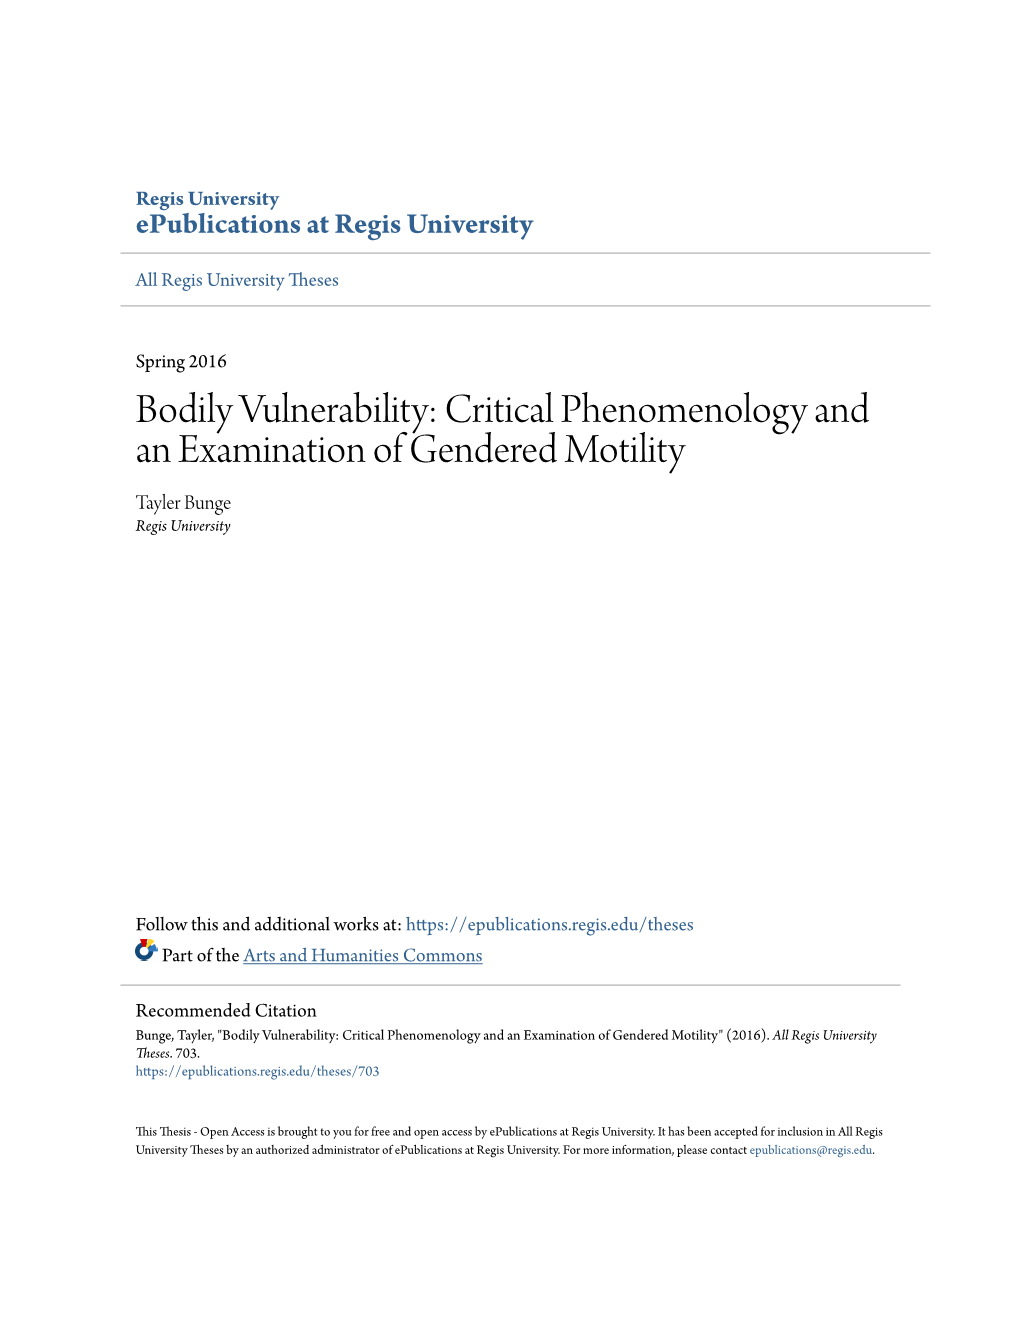 Bodily Vulnerability: Critical Phenomenology and an Examination of Gendered Motility Tayler Bunge Regis University